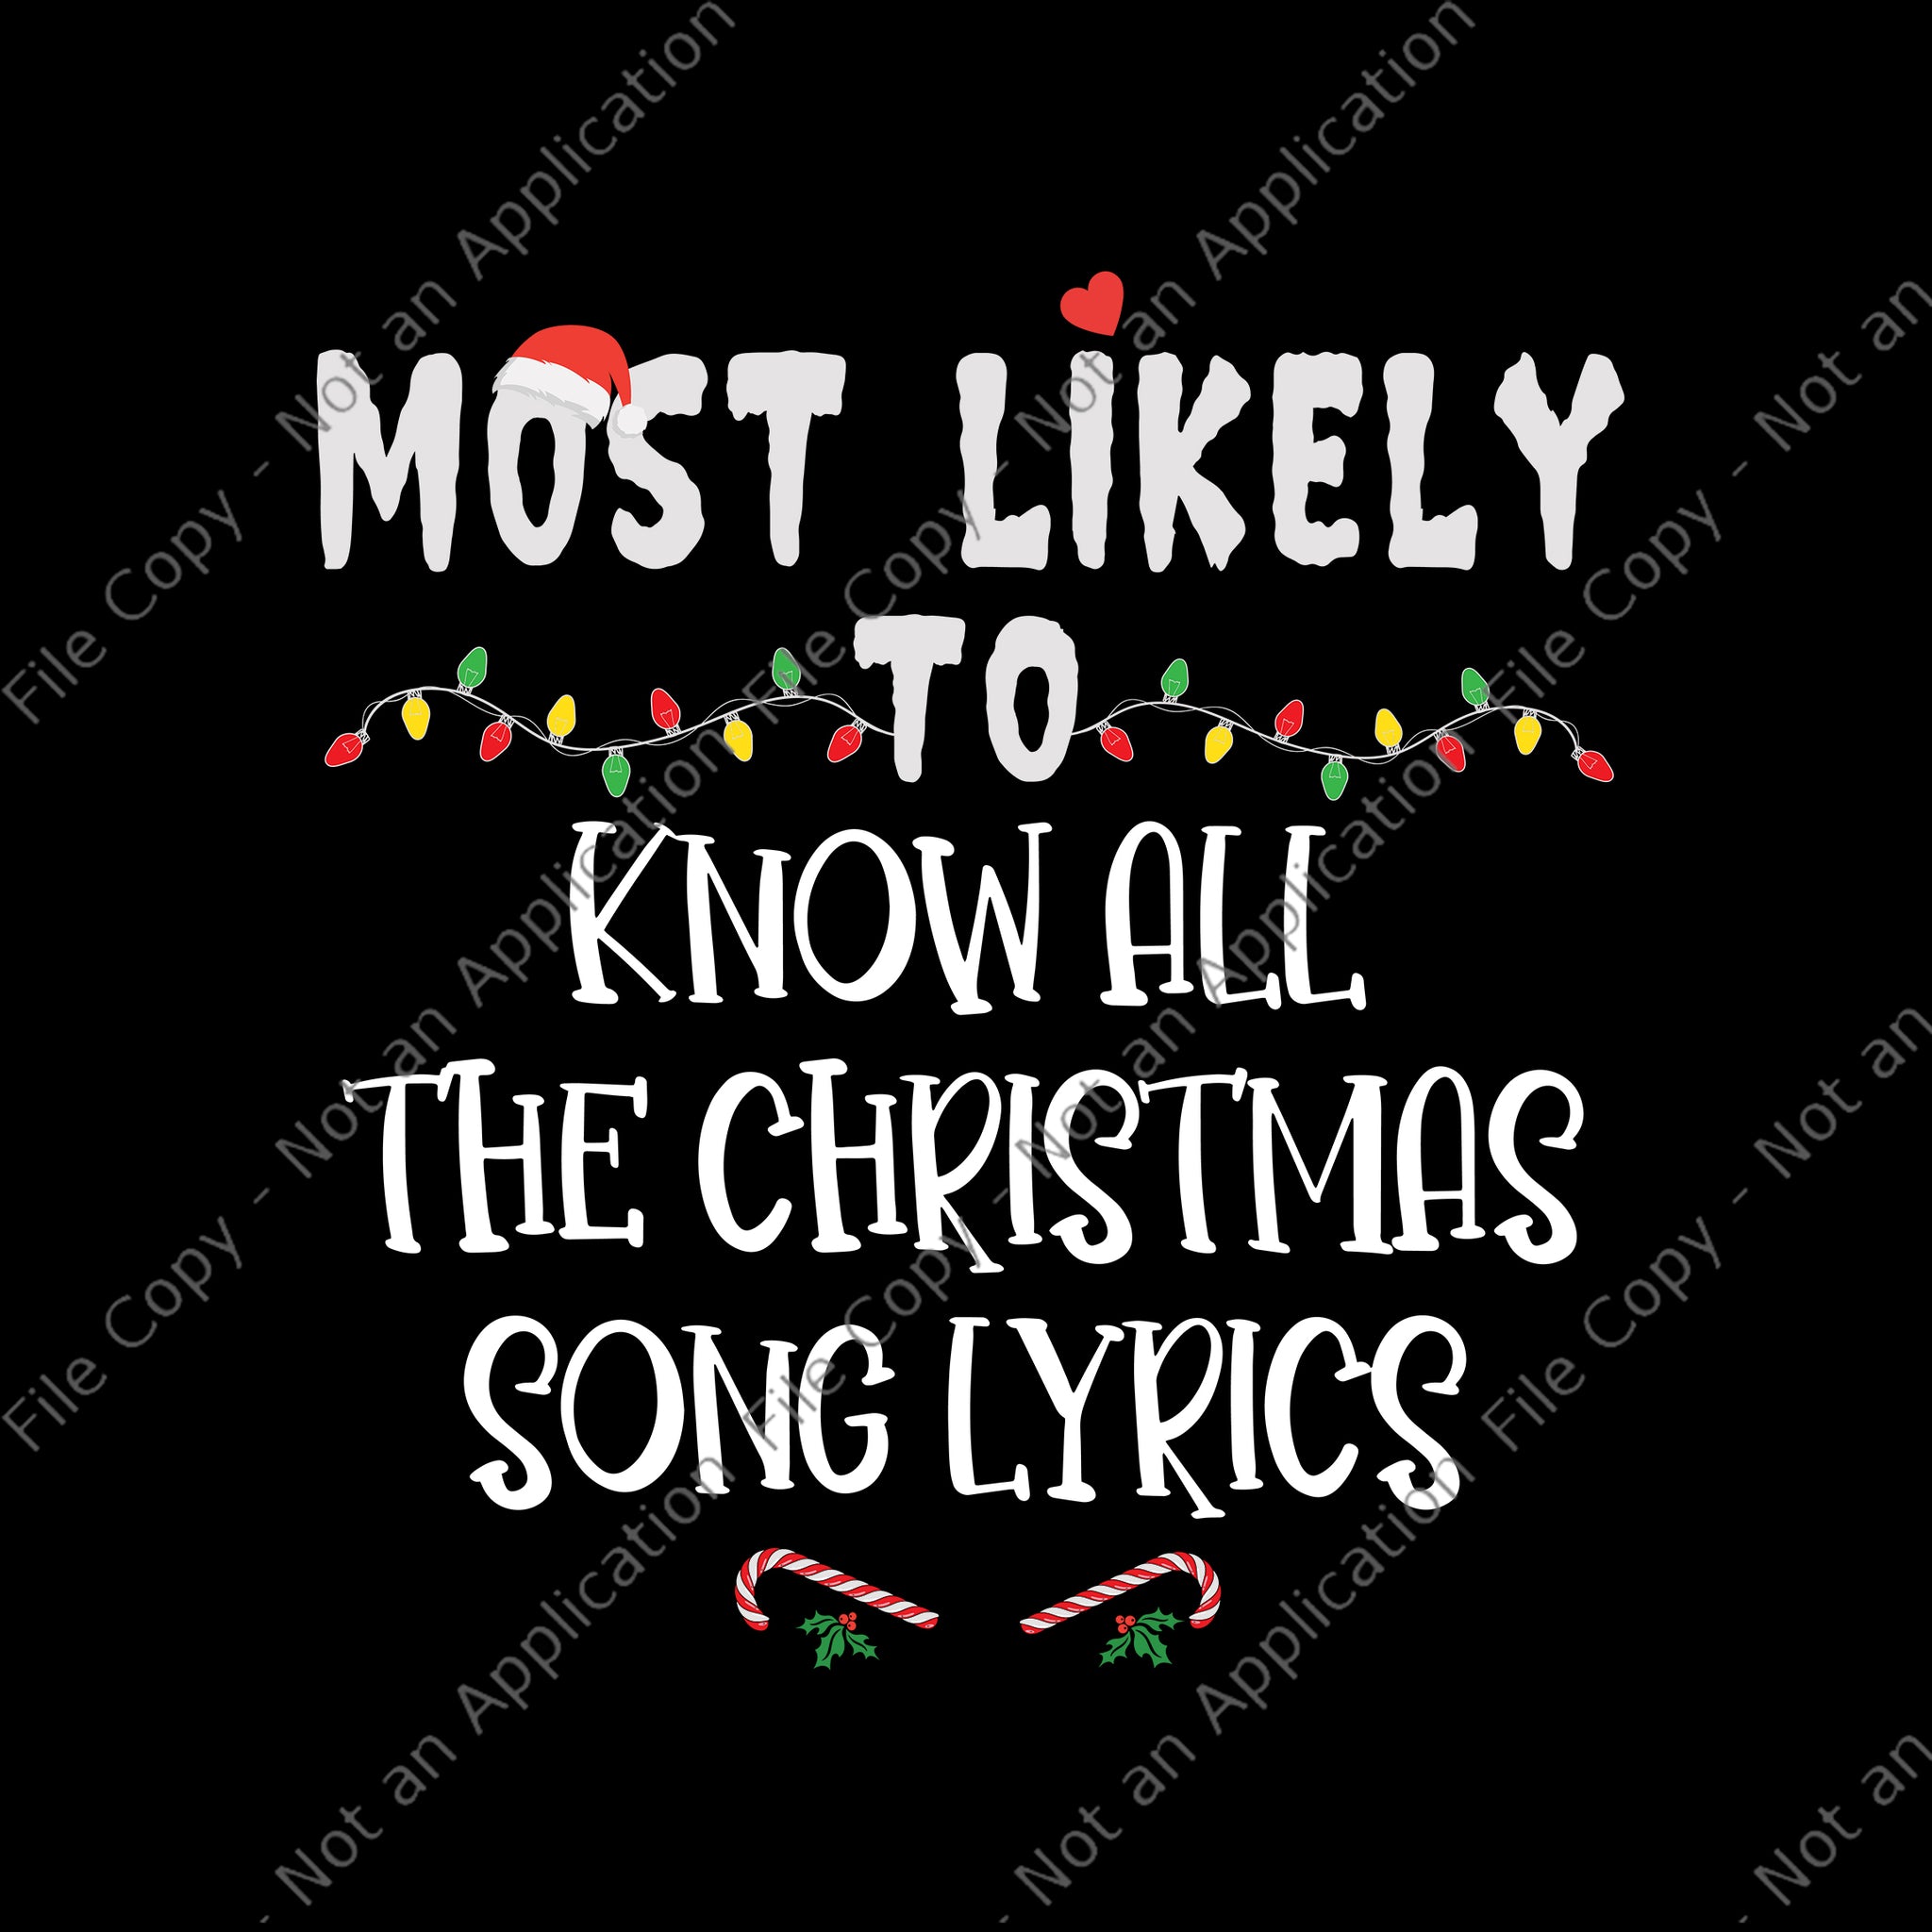 Most Likely To Christmas Know All The Christmas Song Lyrics Svg, Christmas Svg, Christmas Song Lyrics Svg